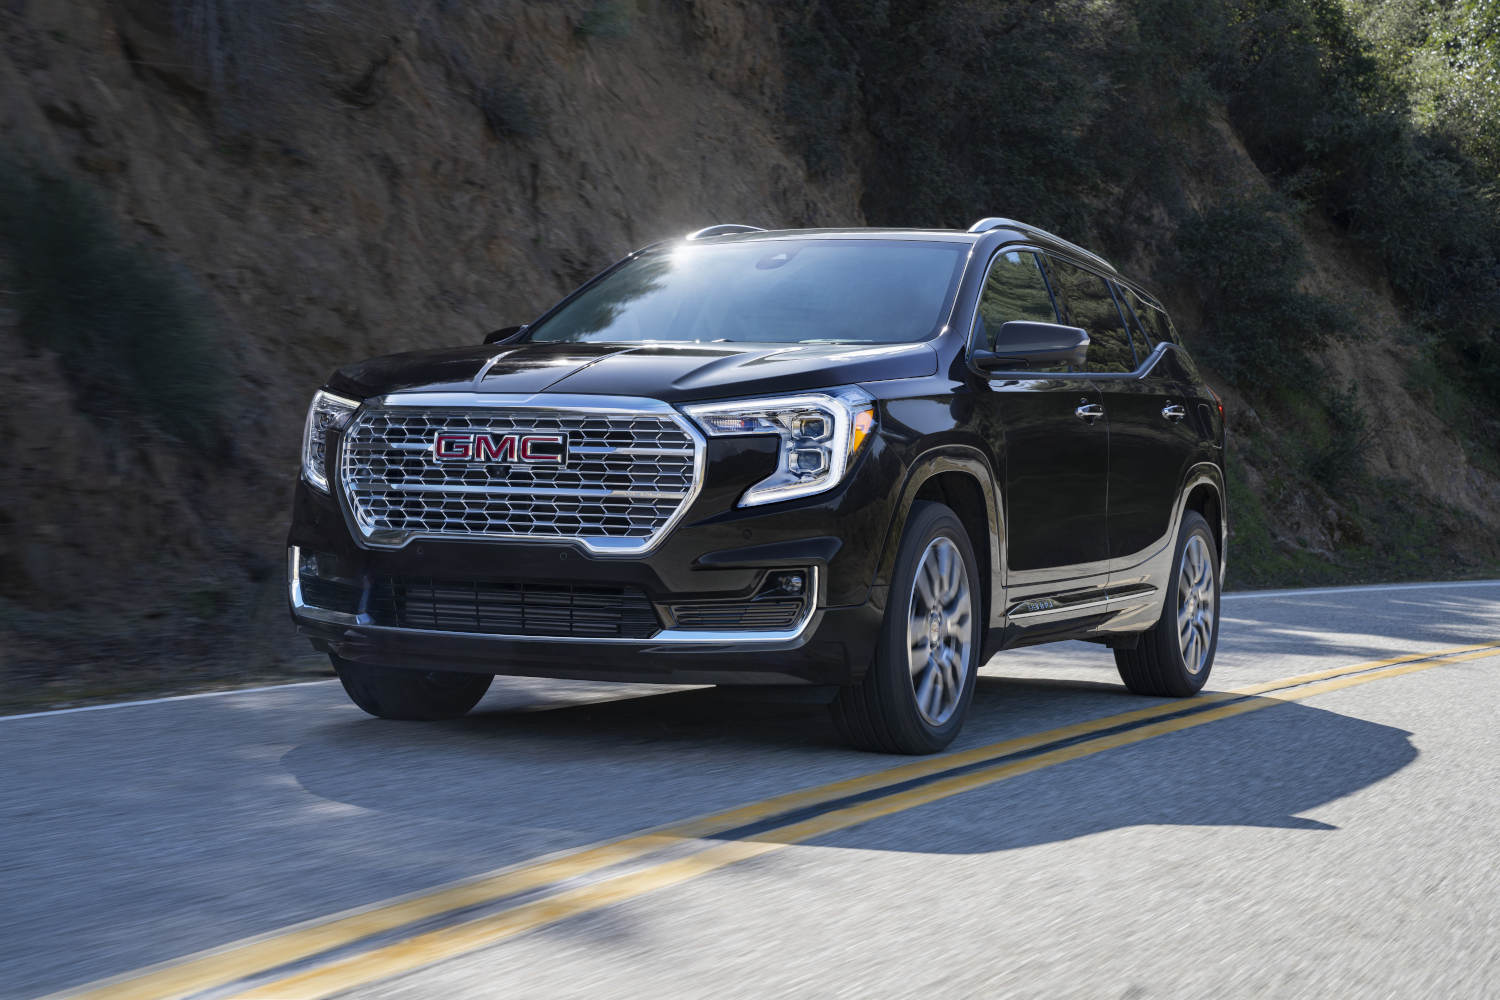 The best compact SUV might not be the GMC Terrain Denali